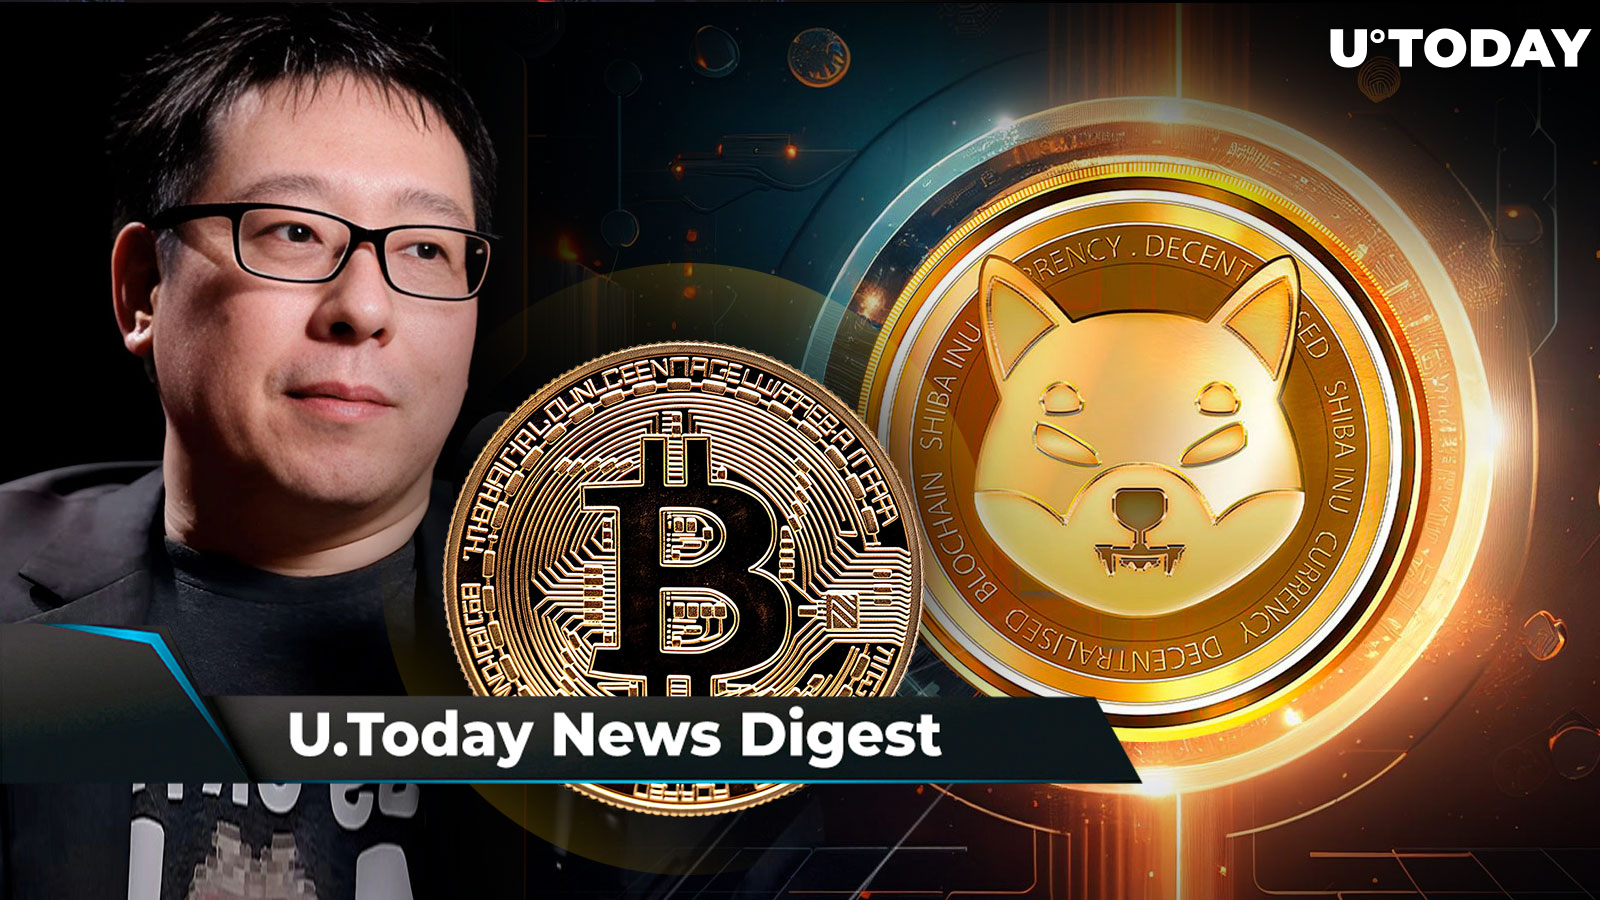 Samson Mow Hints at Bitcoin's Next All-Time High Coming, SHIB Lead Breaks Silence on New SHIB Mega Deal, 1.2 Billion DOGE Moved to Binance and Robinhood: Crypto News Digest by U.Today